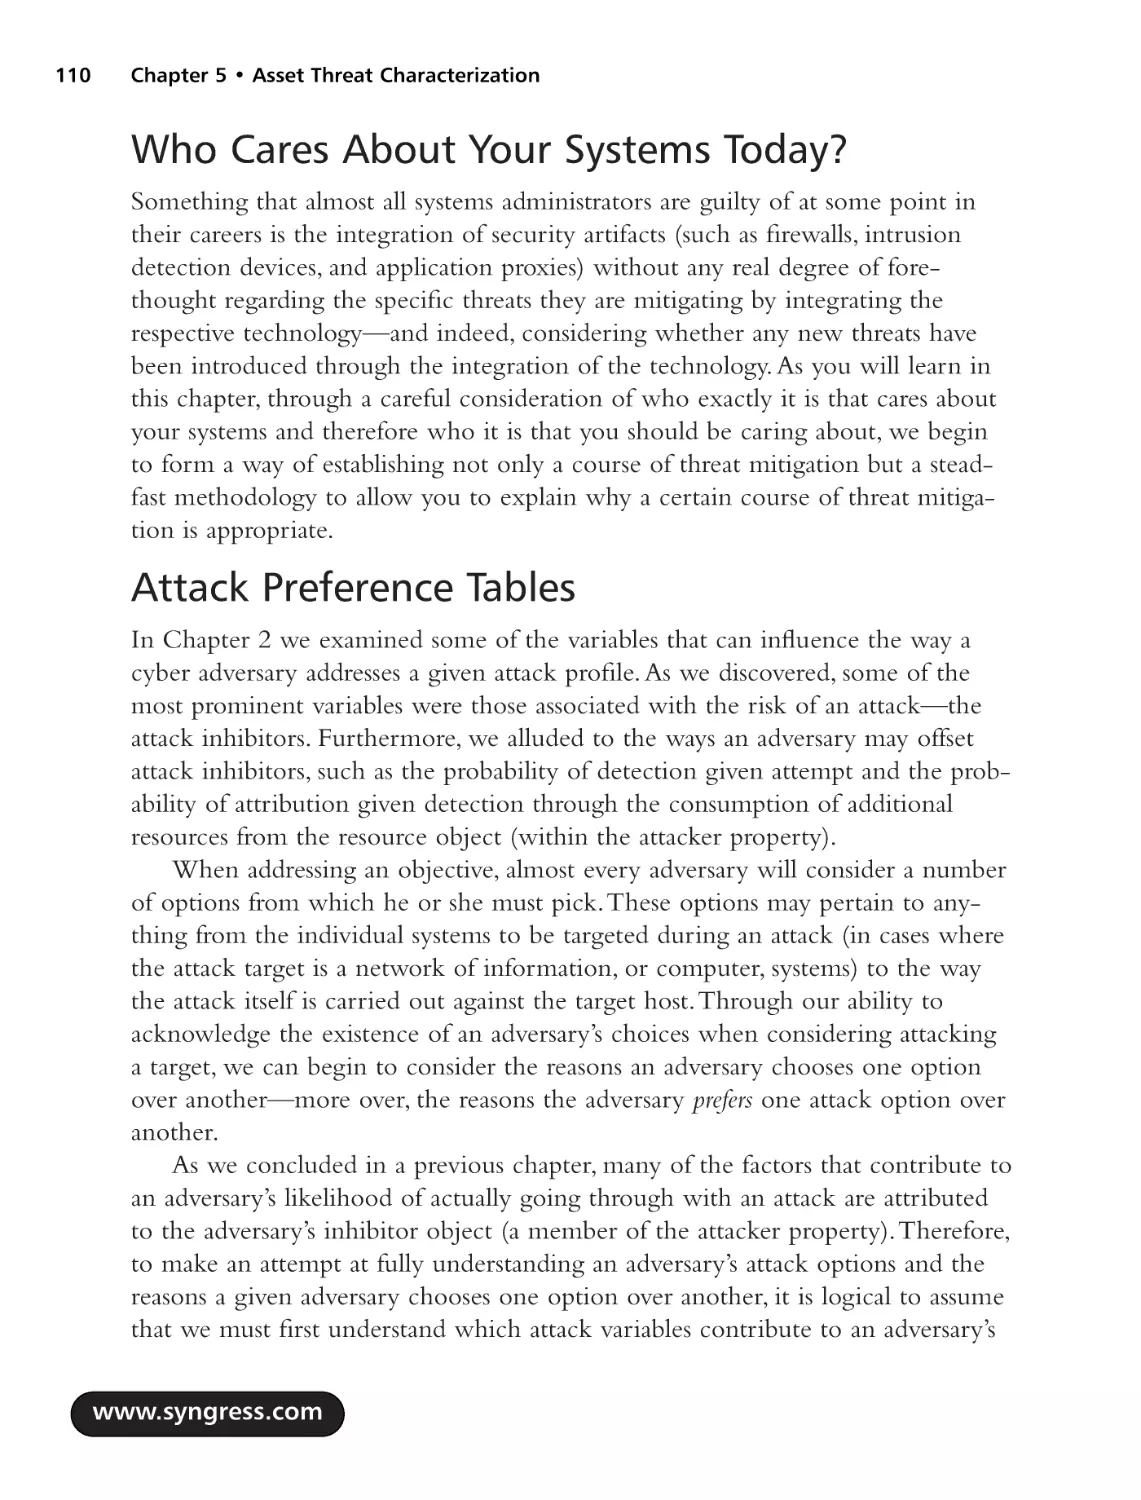 Who Cares About Your Systems Today?
Attack Preference Tables